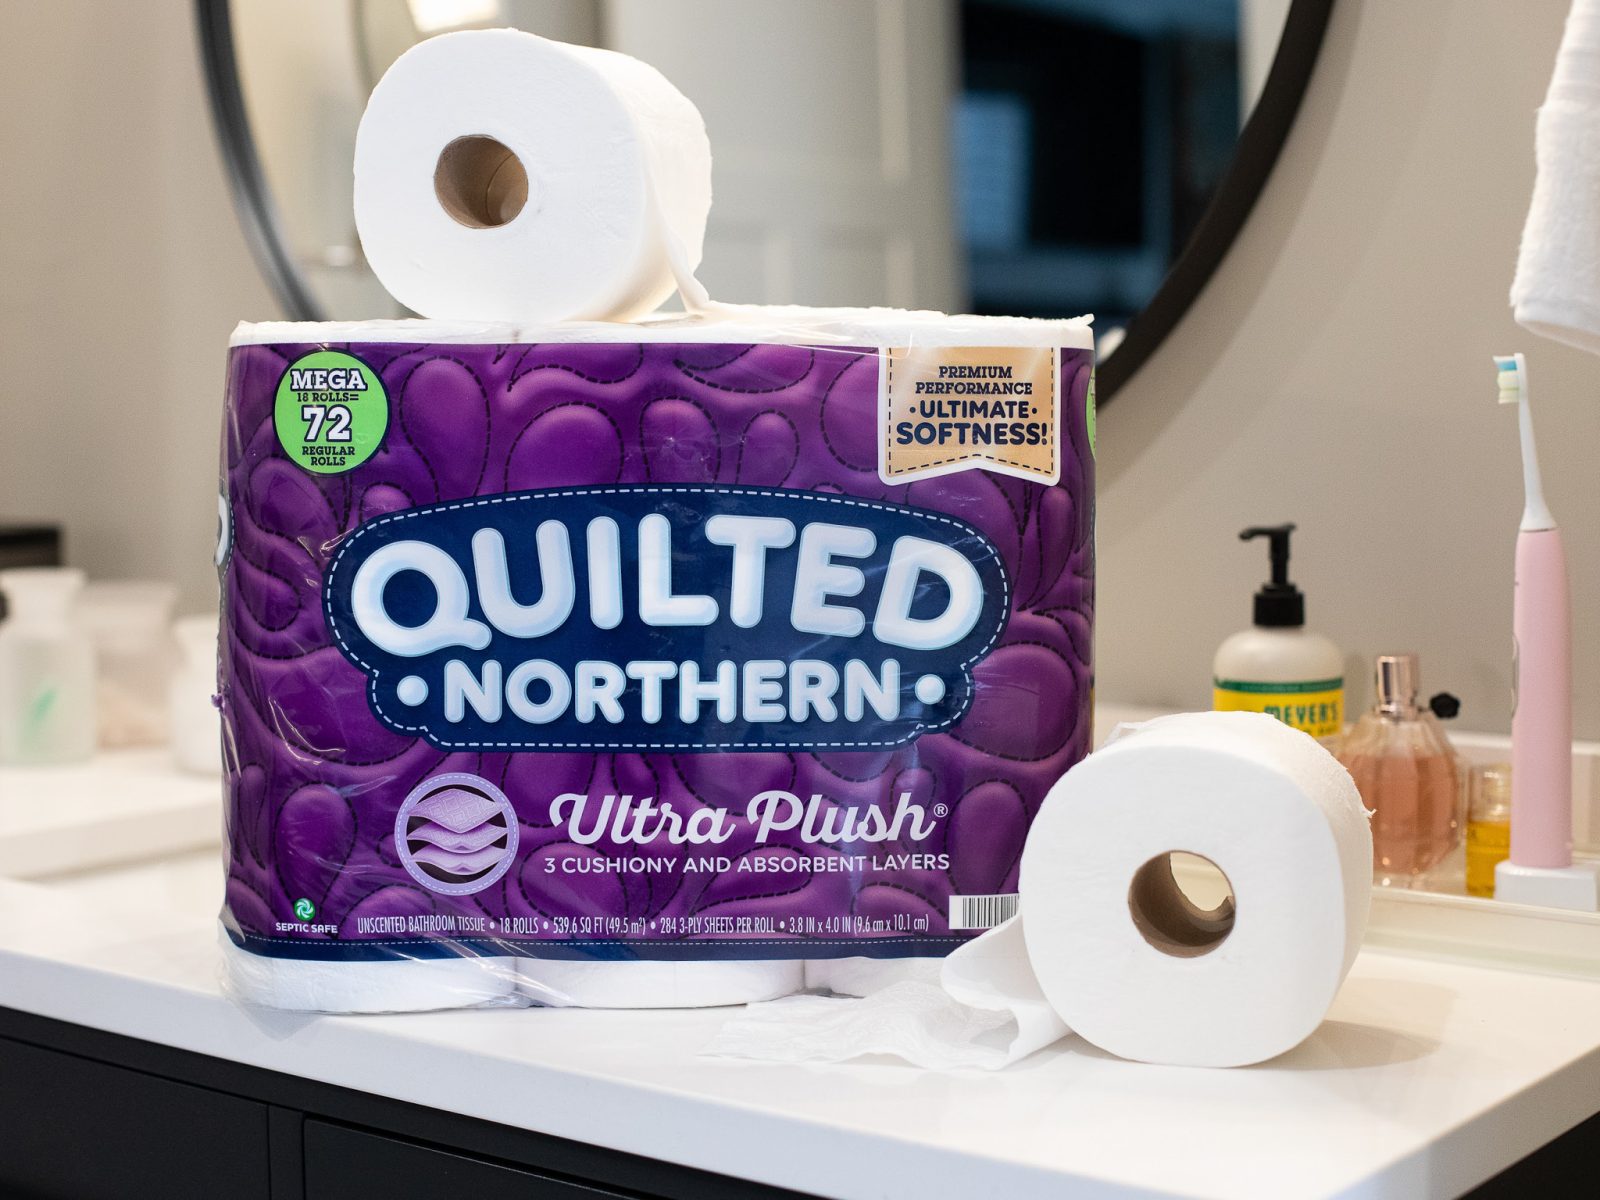 Quilted Northern Bathroom Tissue, Double Roll, 2 Ply, Unscented